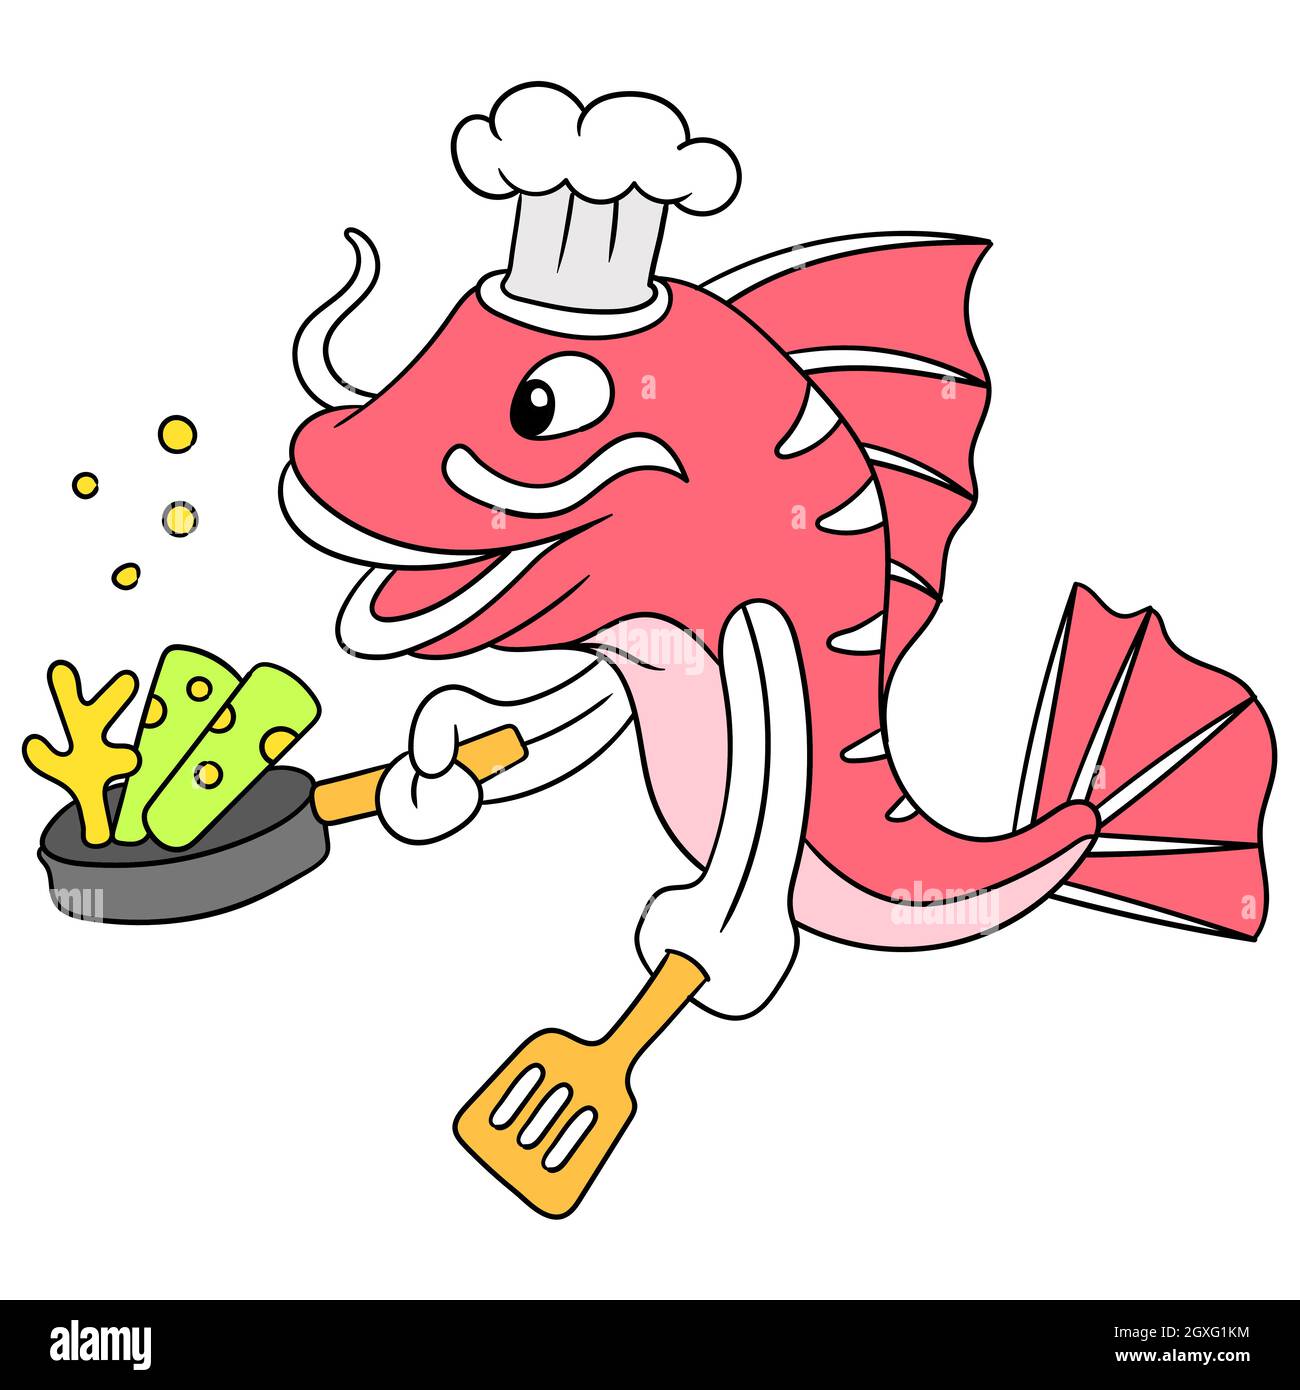 red snapper is cooking as a chef holding a frying pan Stock Vector